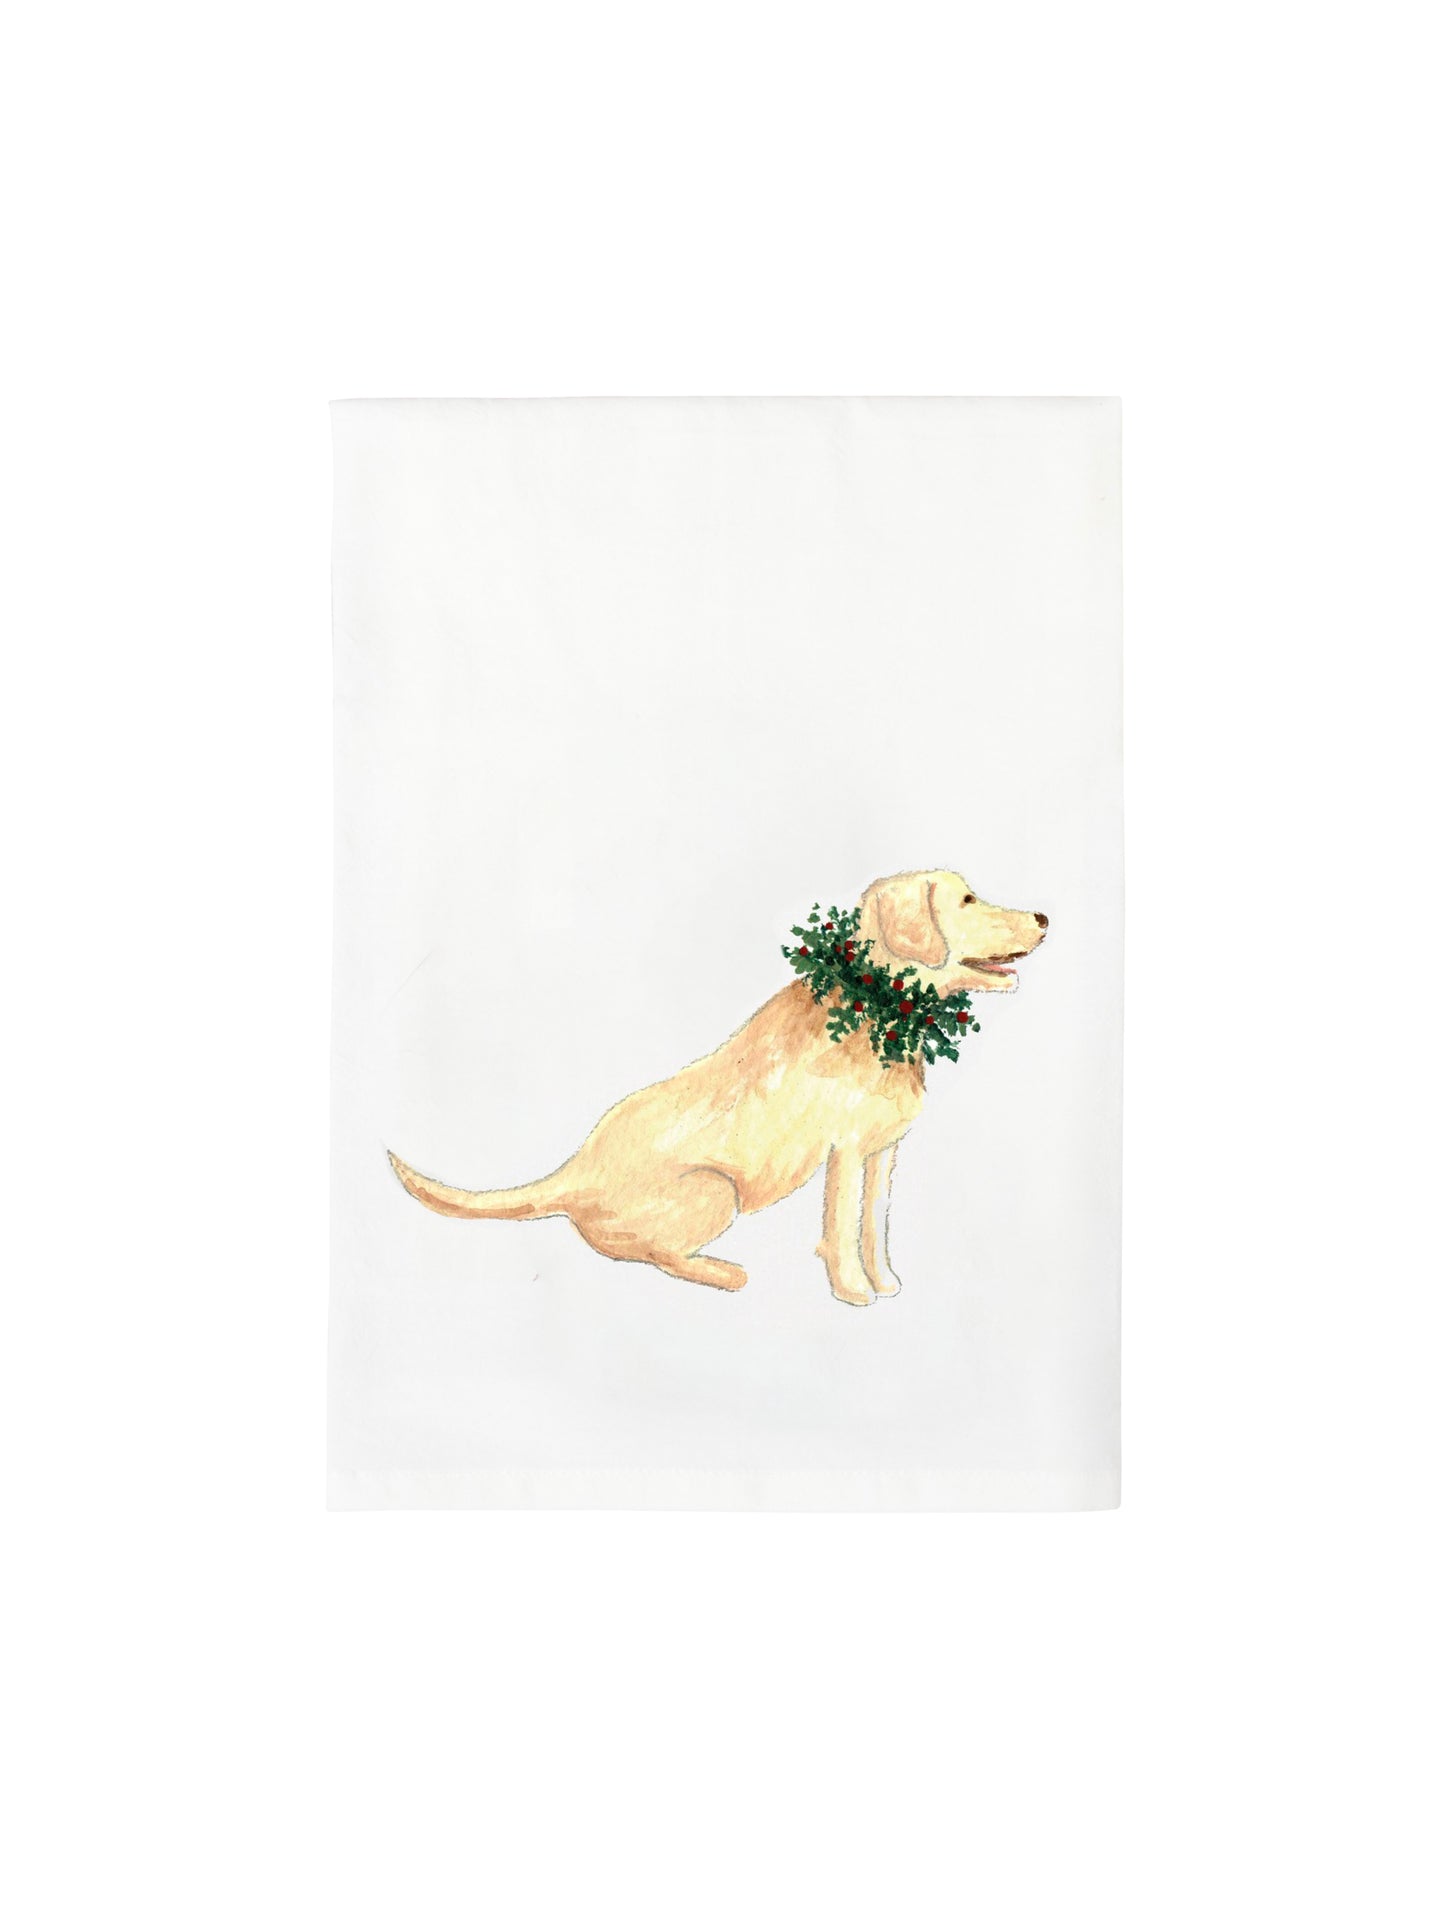 Ski and Holiday Dog Flour Sack Towels Yellow Lab with Wreath Weston Table